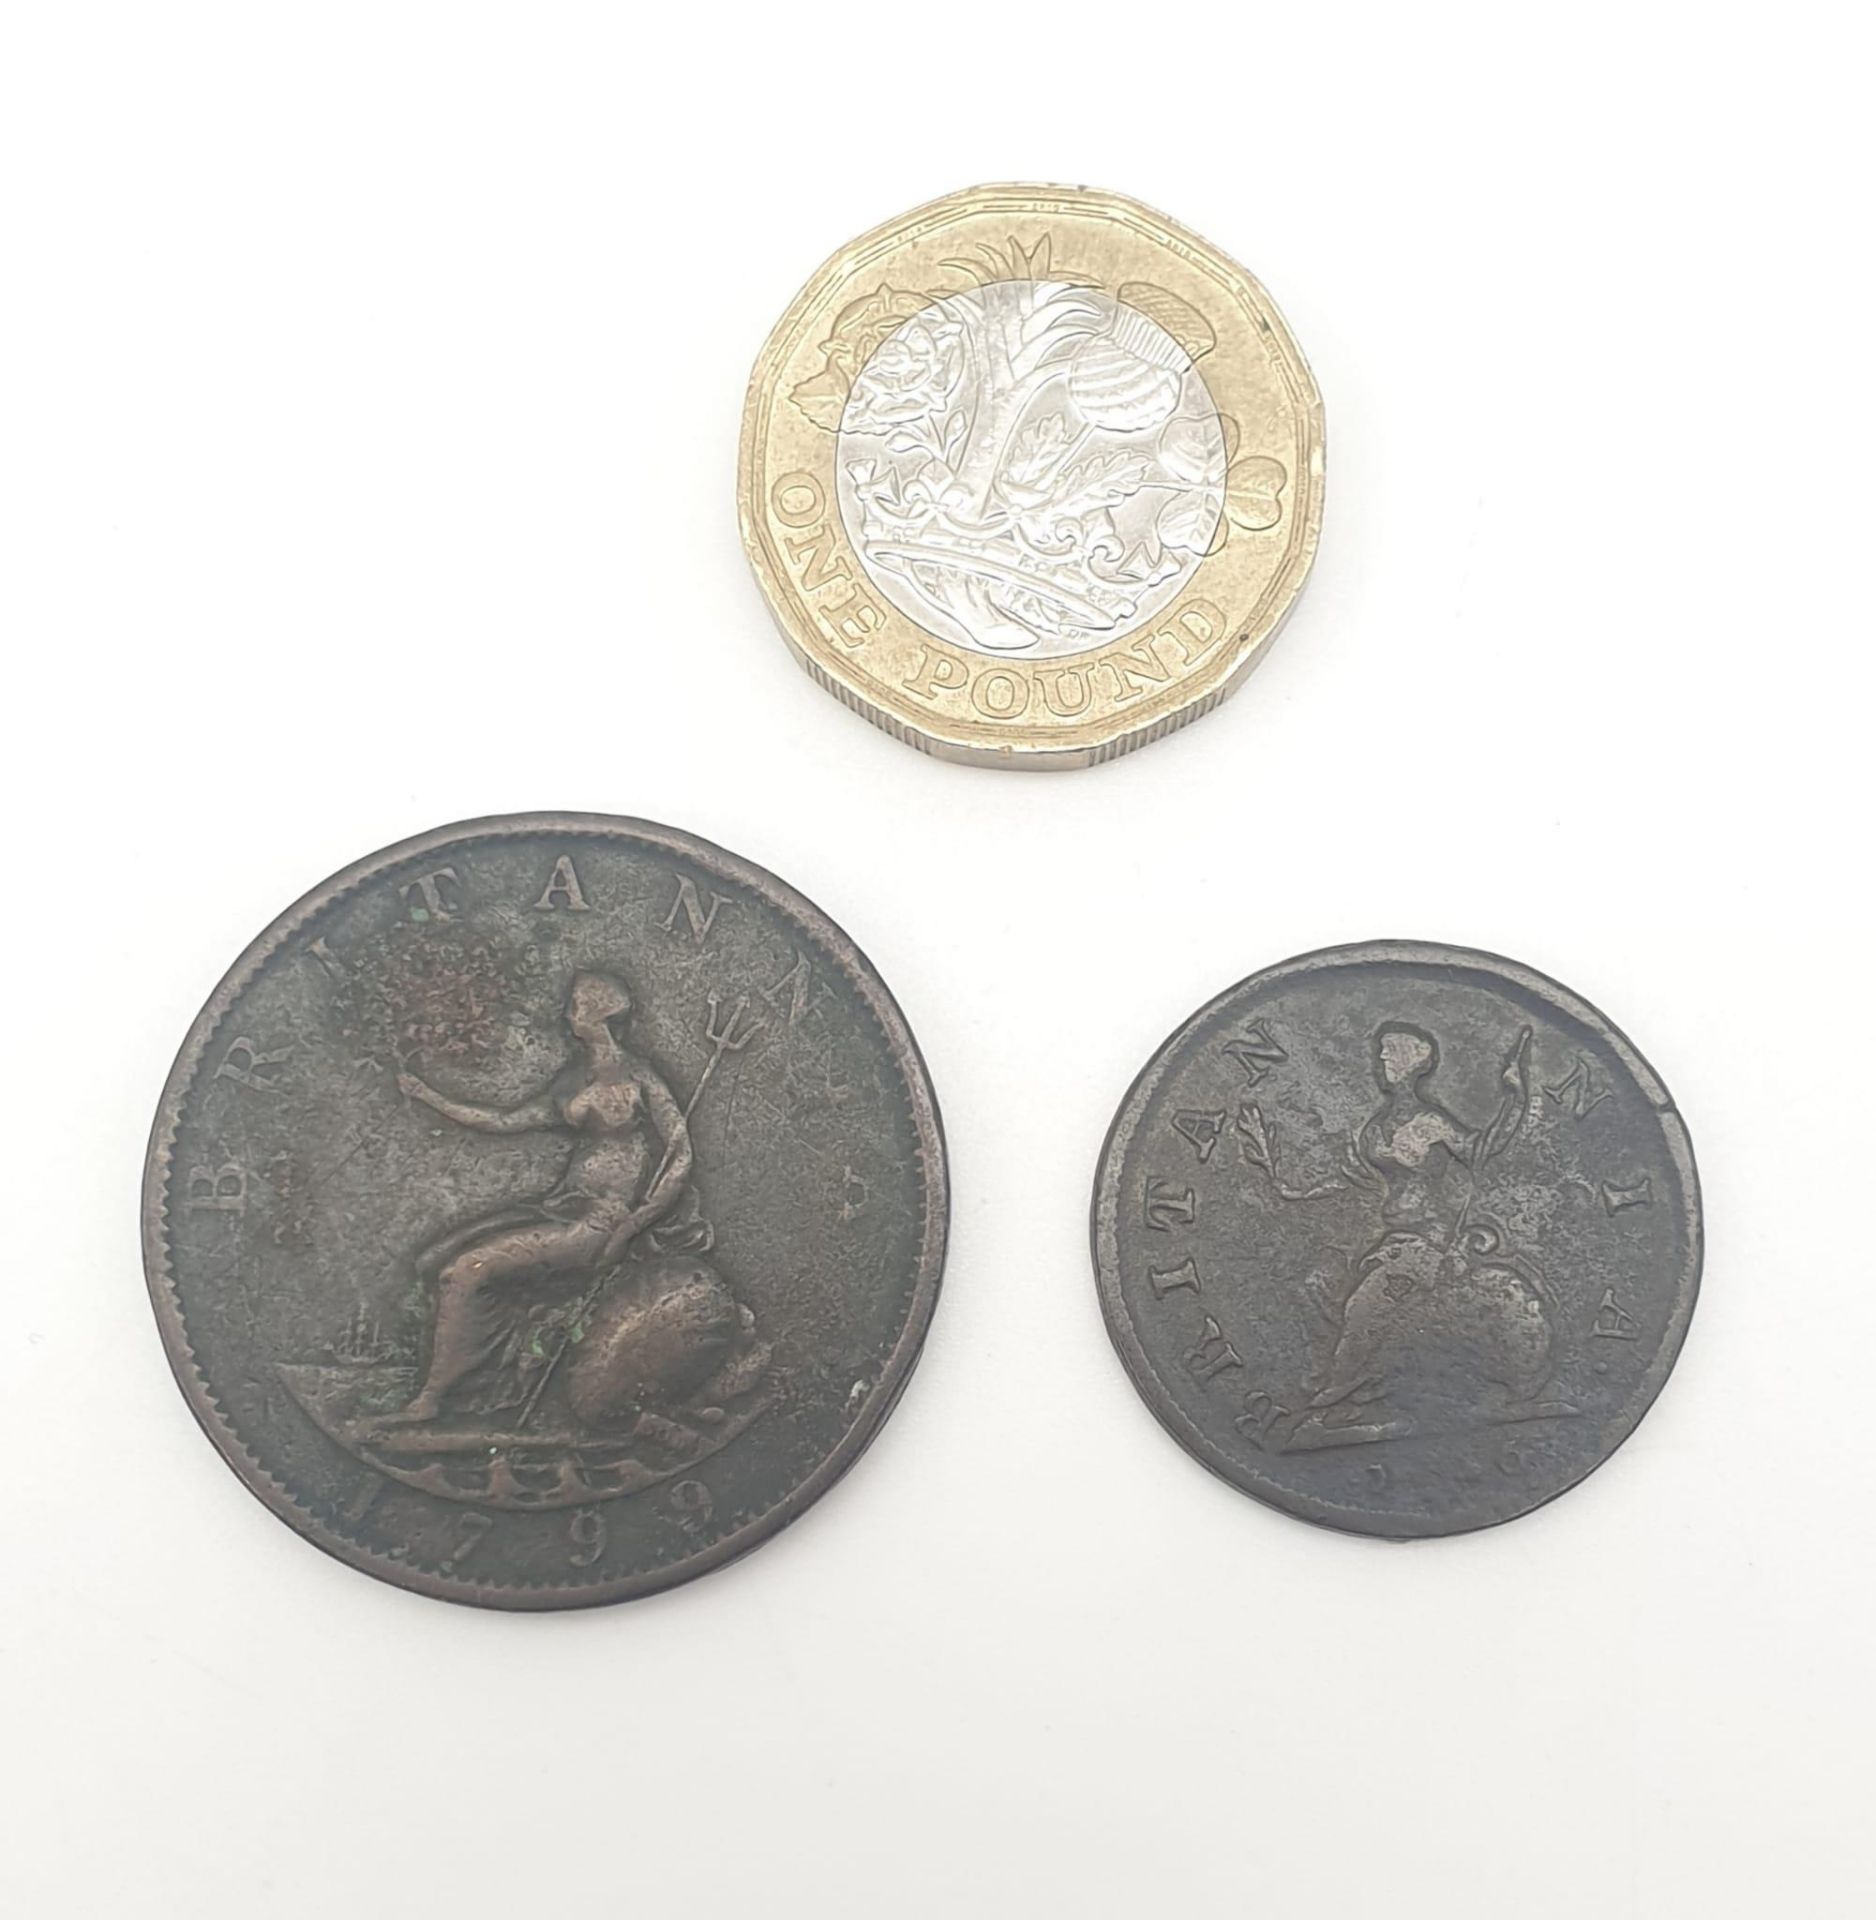 A George II 1747 Copper Farthing (NF) and a George III 1799 Copper One Pence Coin (NF). - Image 2 of 3